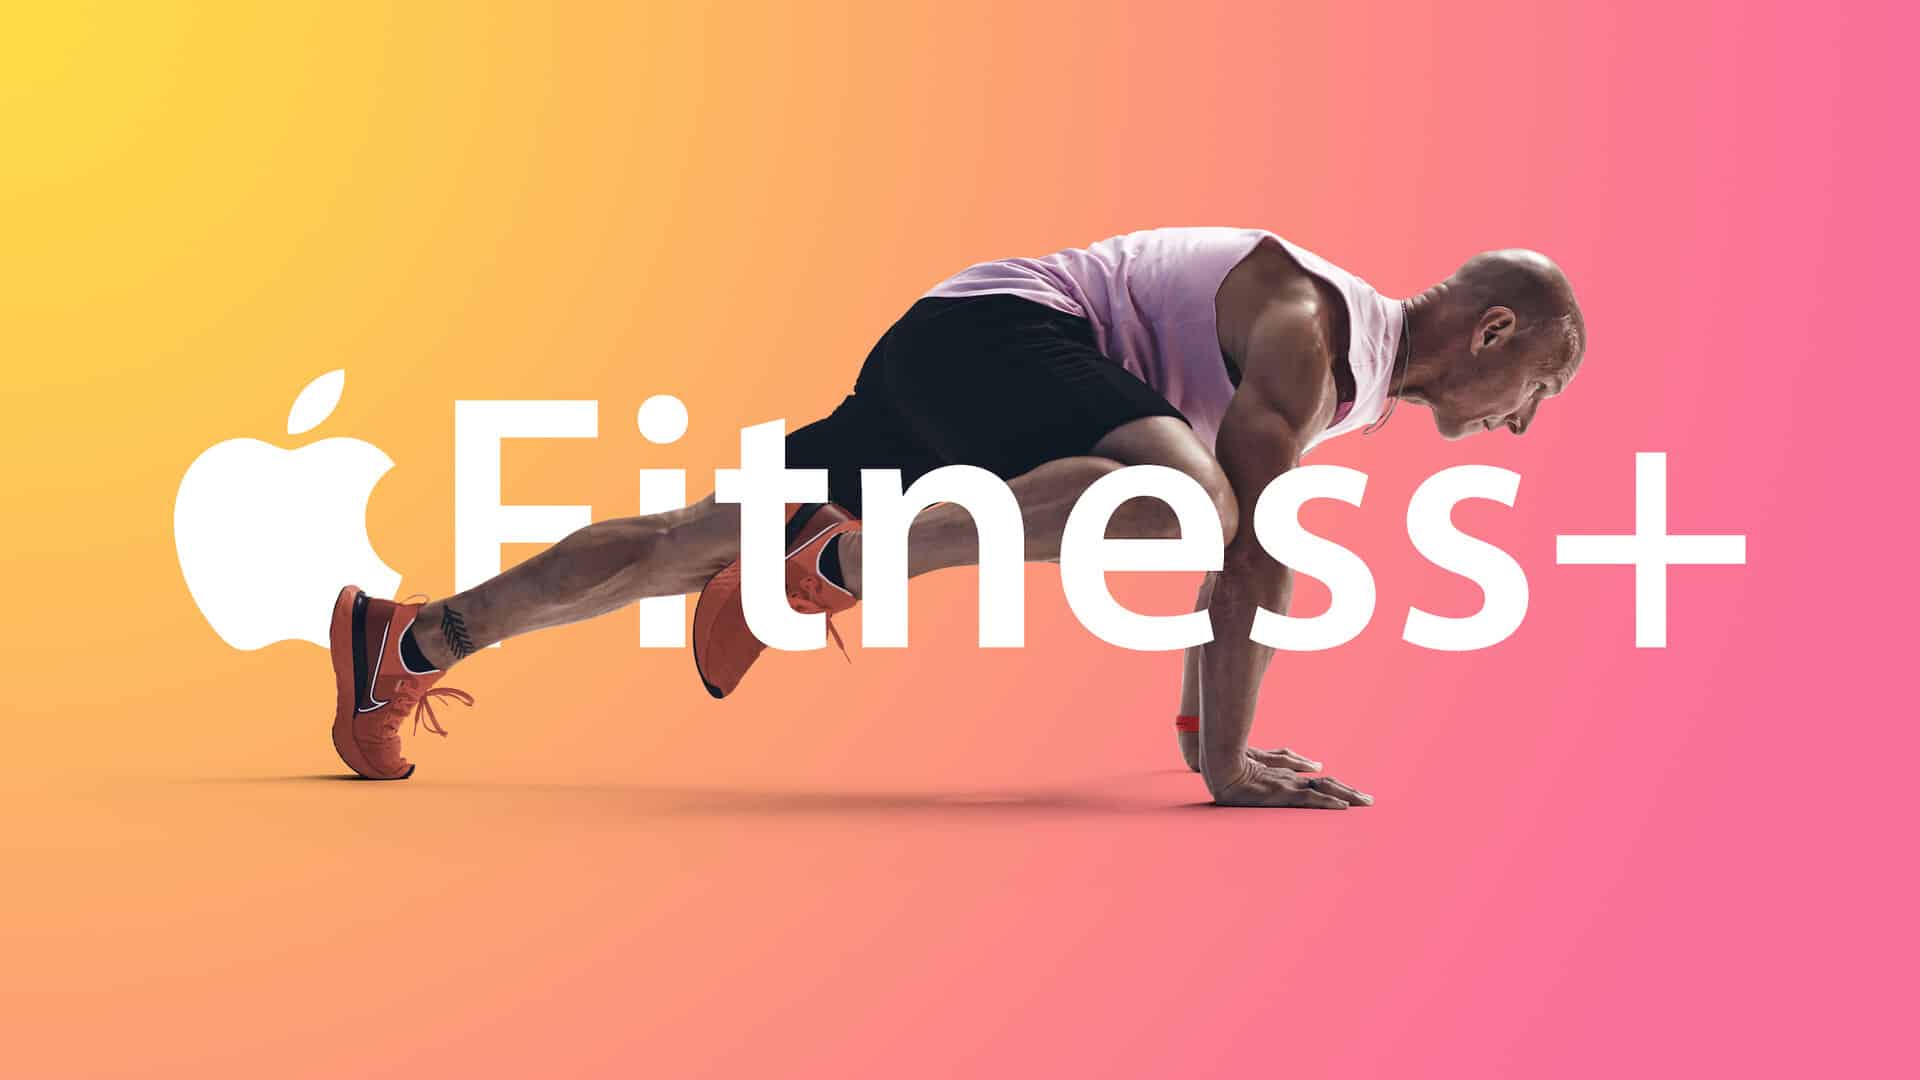 Apple Fitness+ to introduce guided Meditation and Pilates on Sep 27